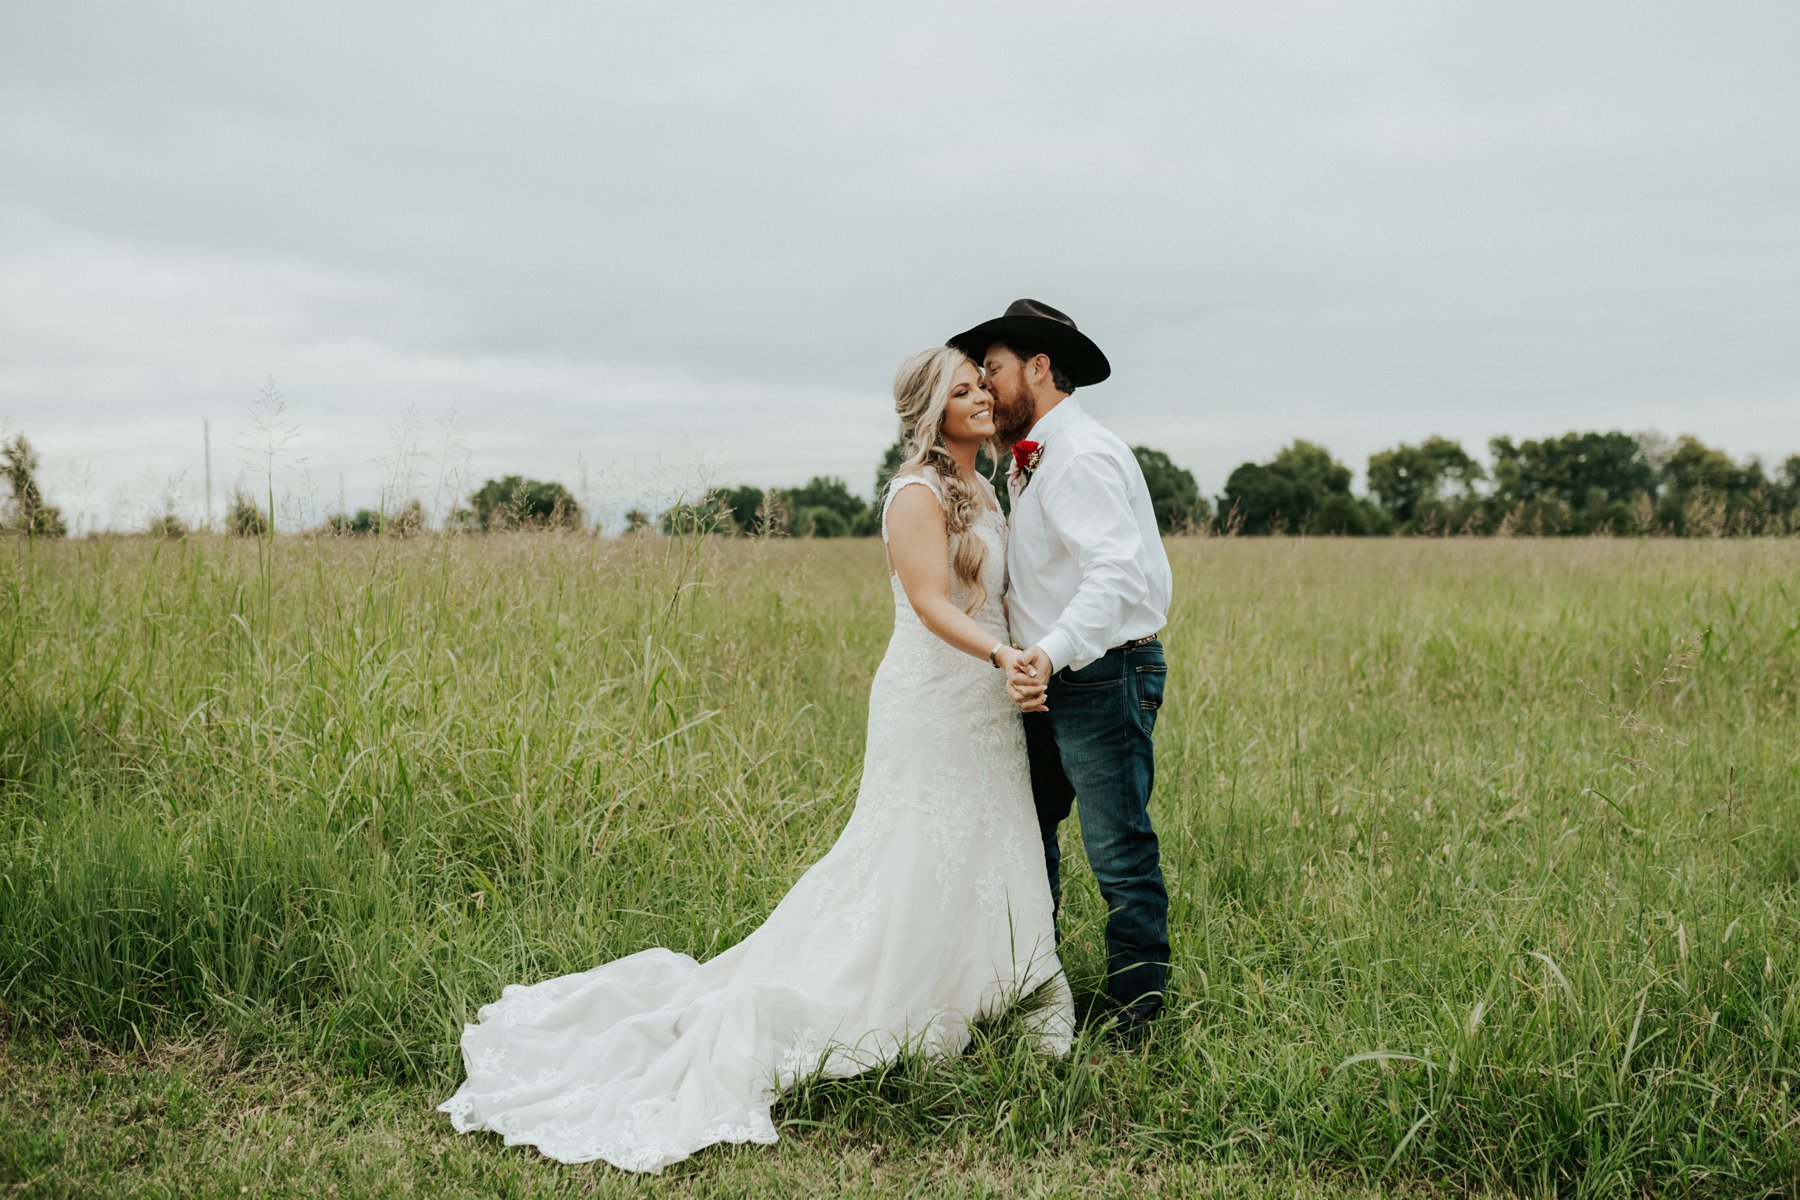 A bride and groom portrait at The Barn at Belamour in Springfield, MO.